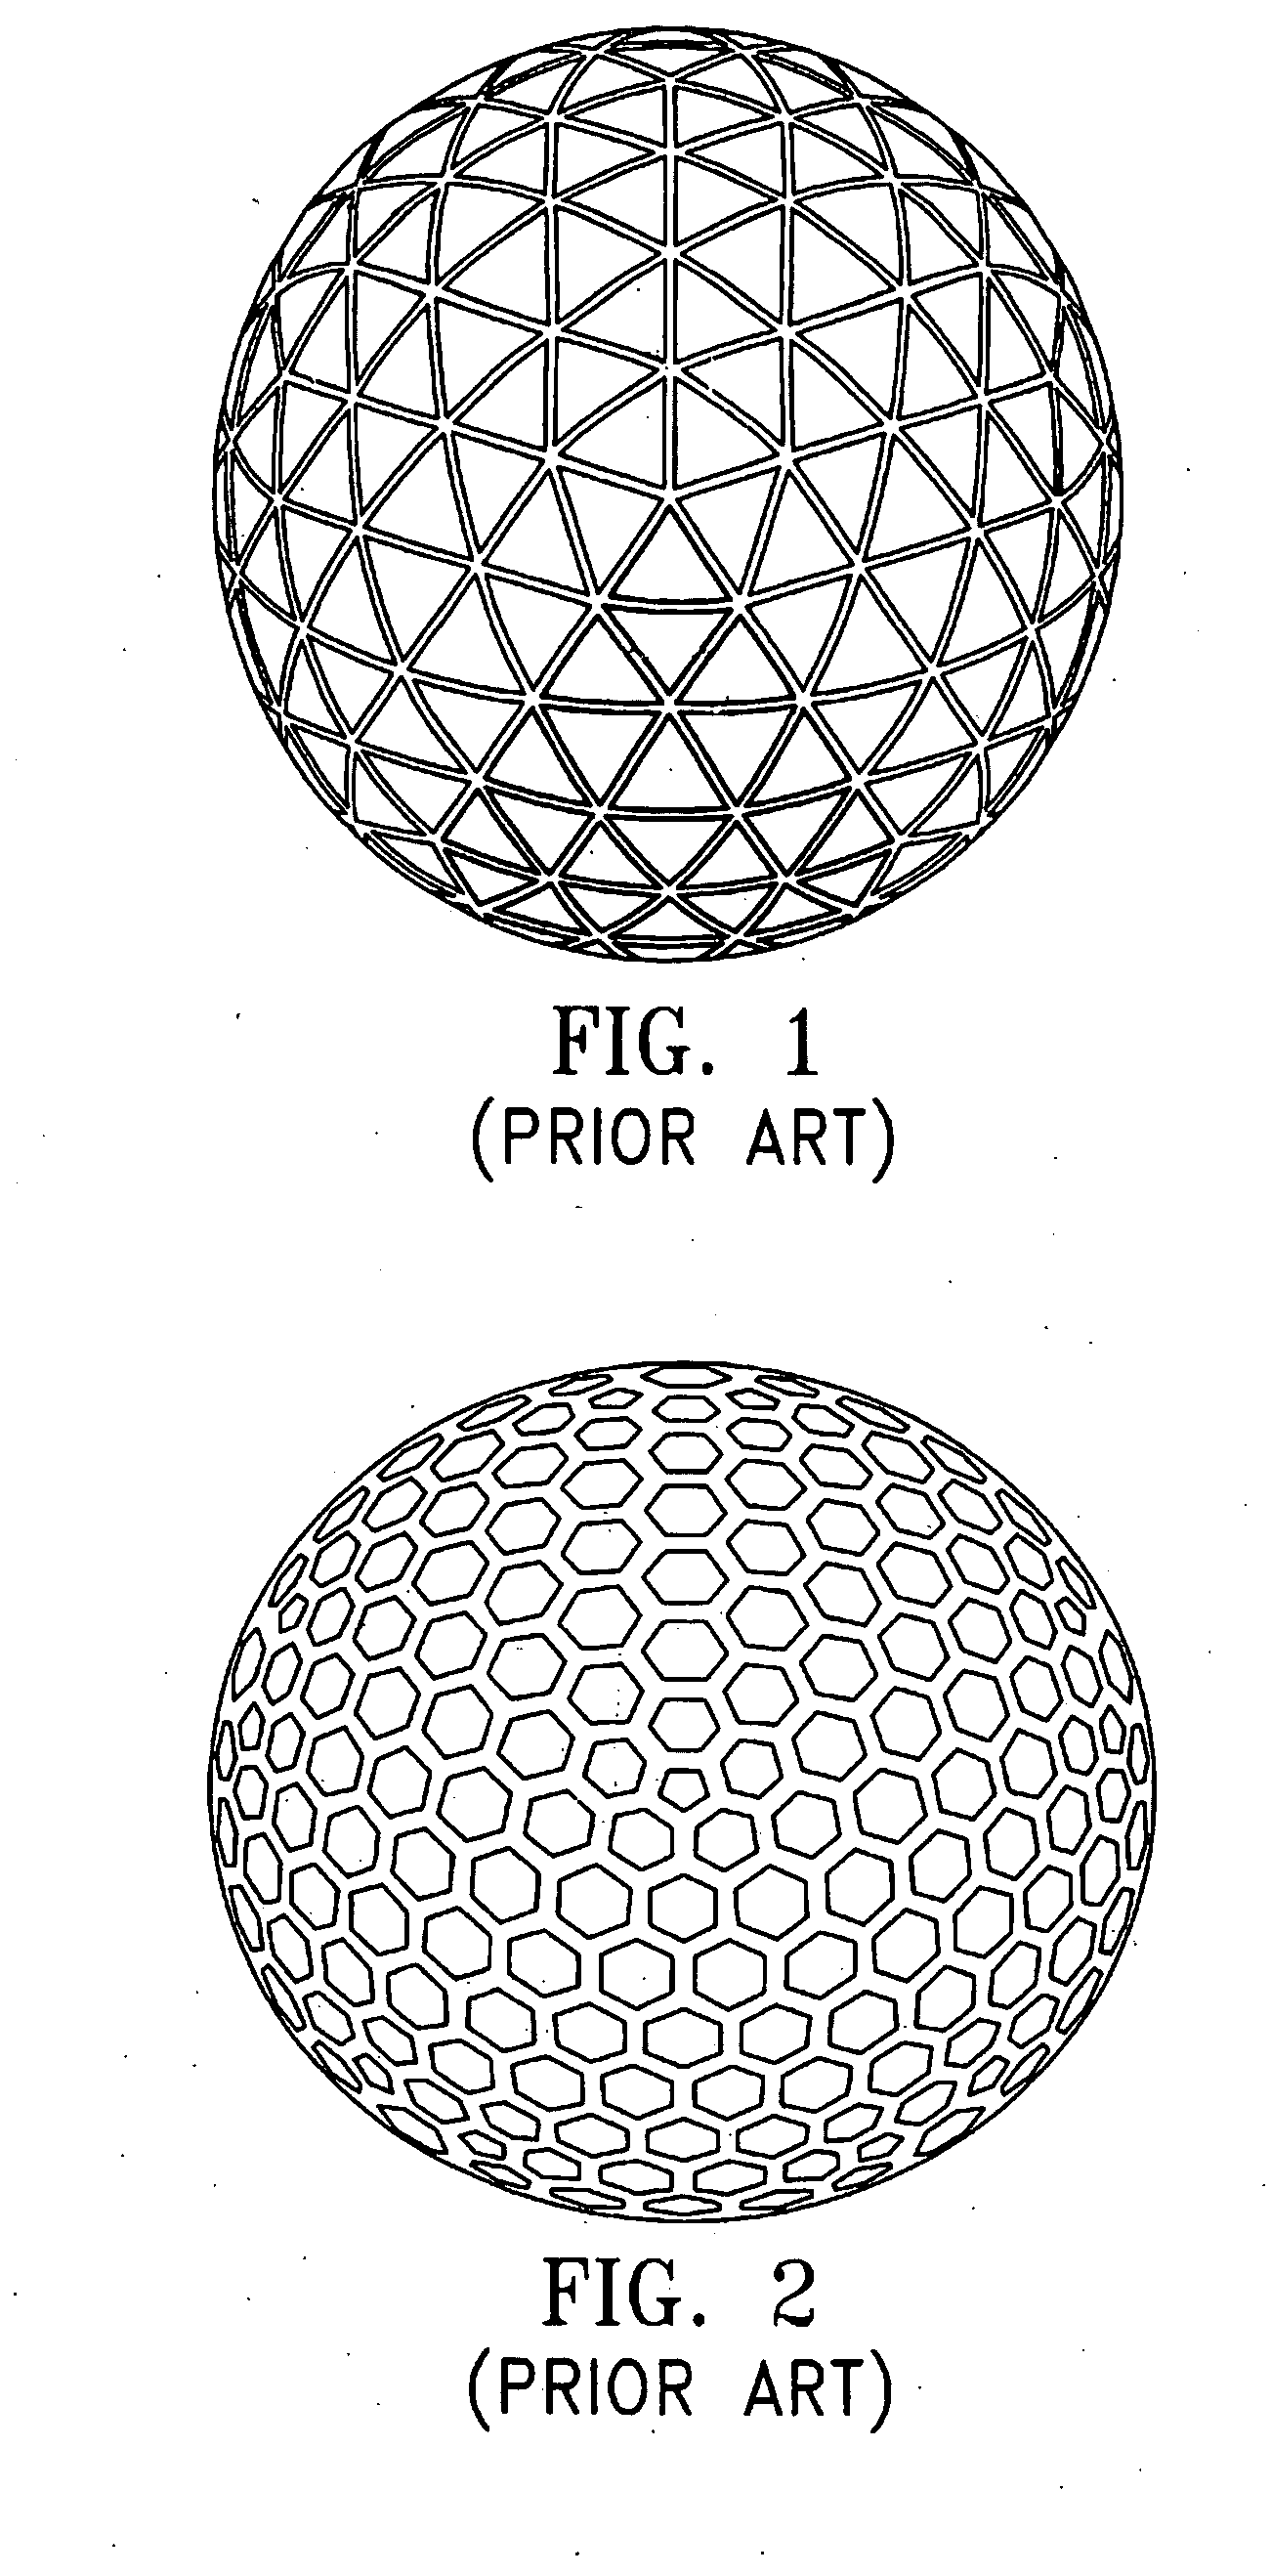 Golf ball with varying land surfaces